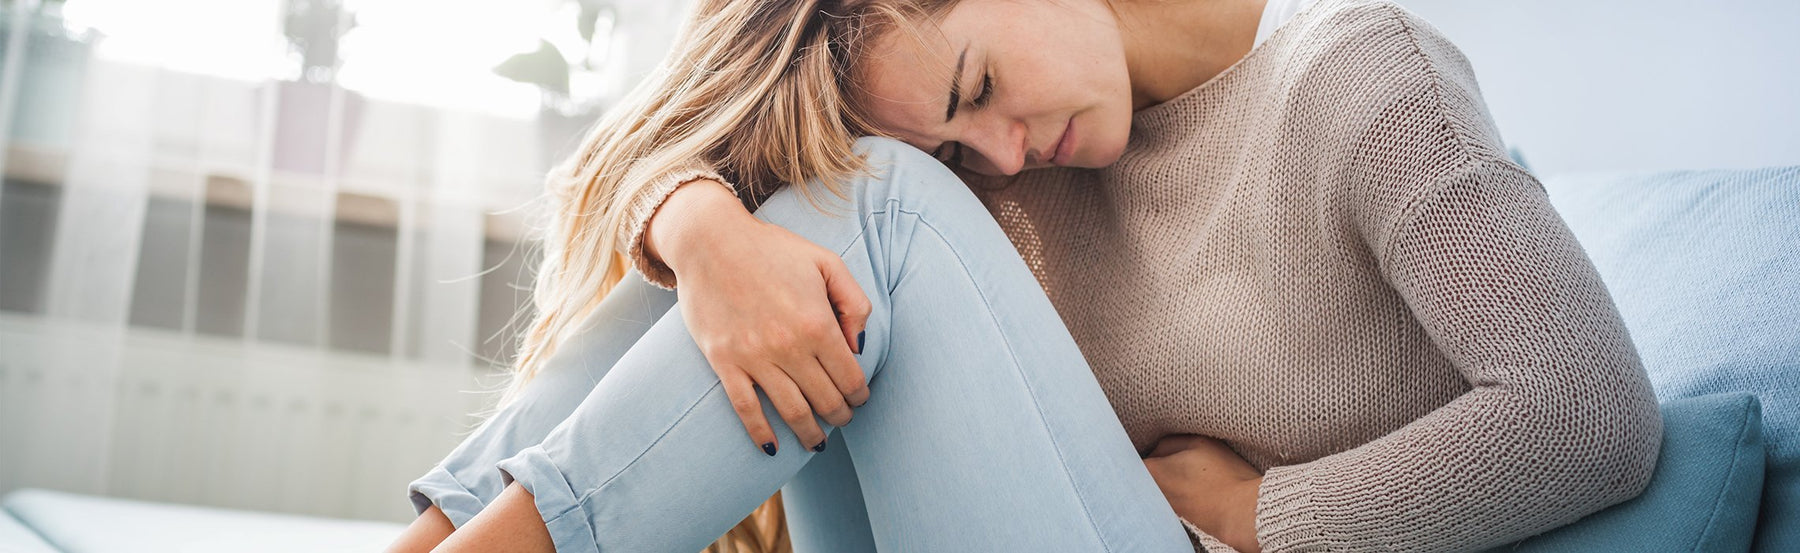 4 Body Pains You Shouldn’t Ignore